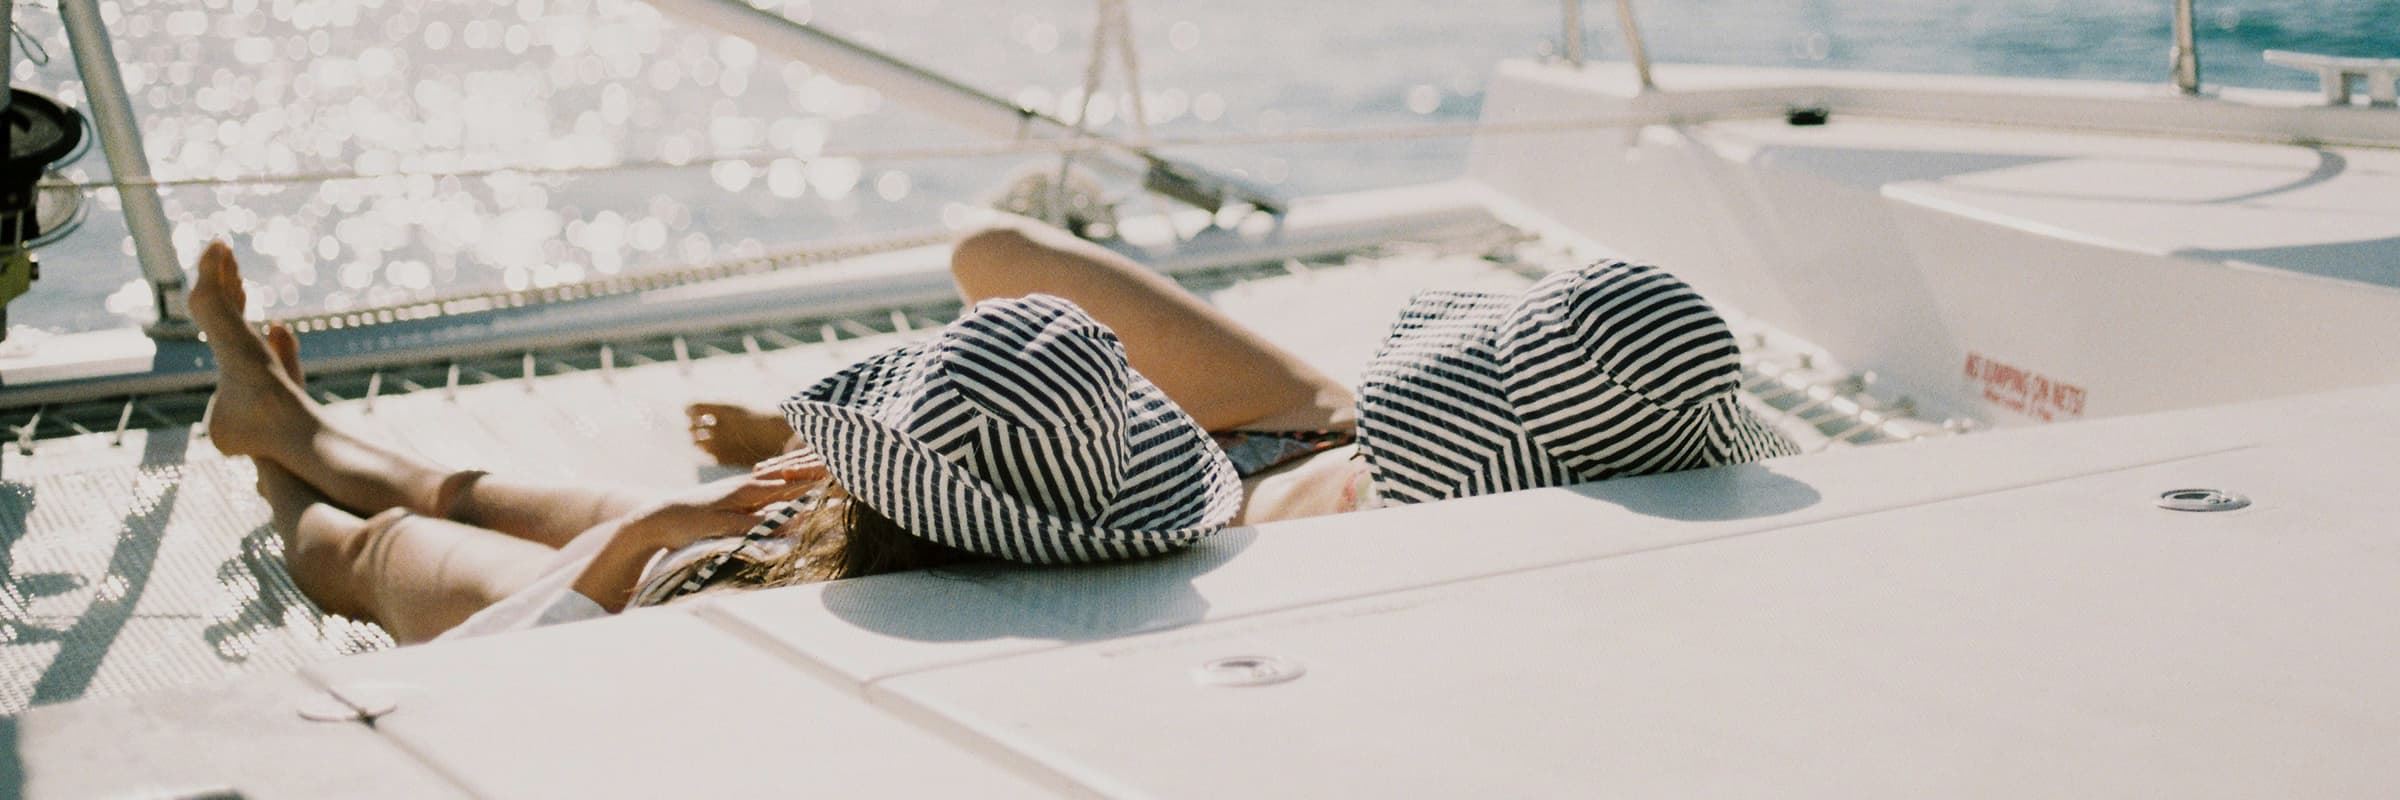 two people laying on a boat deck with blue striped hats